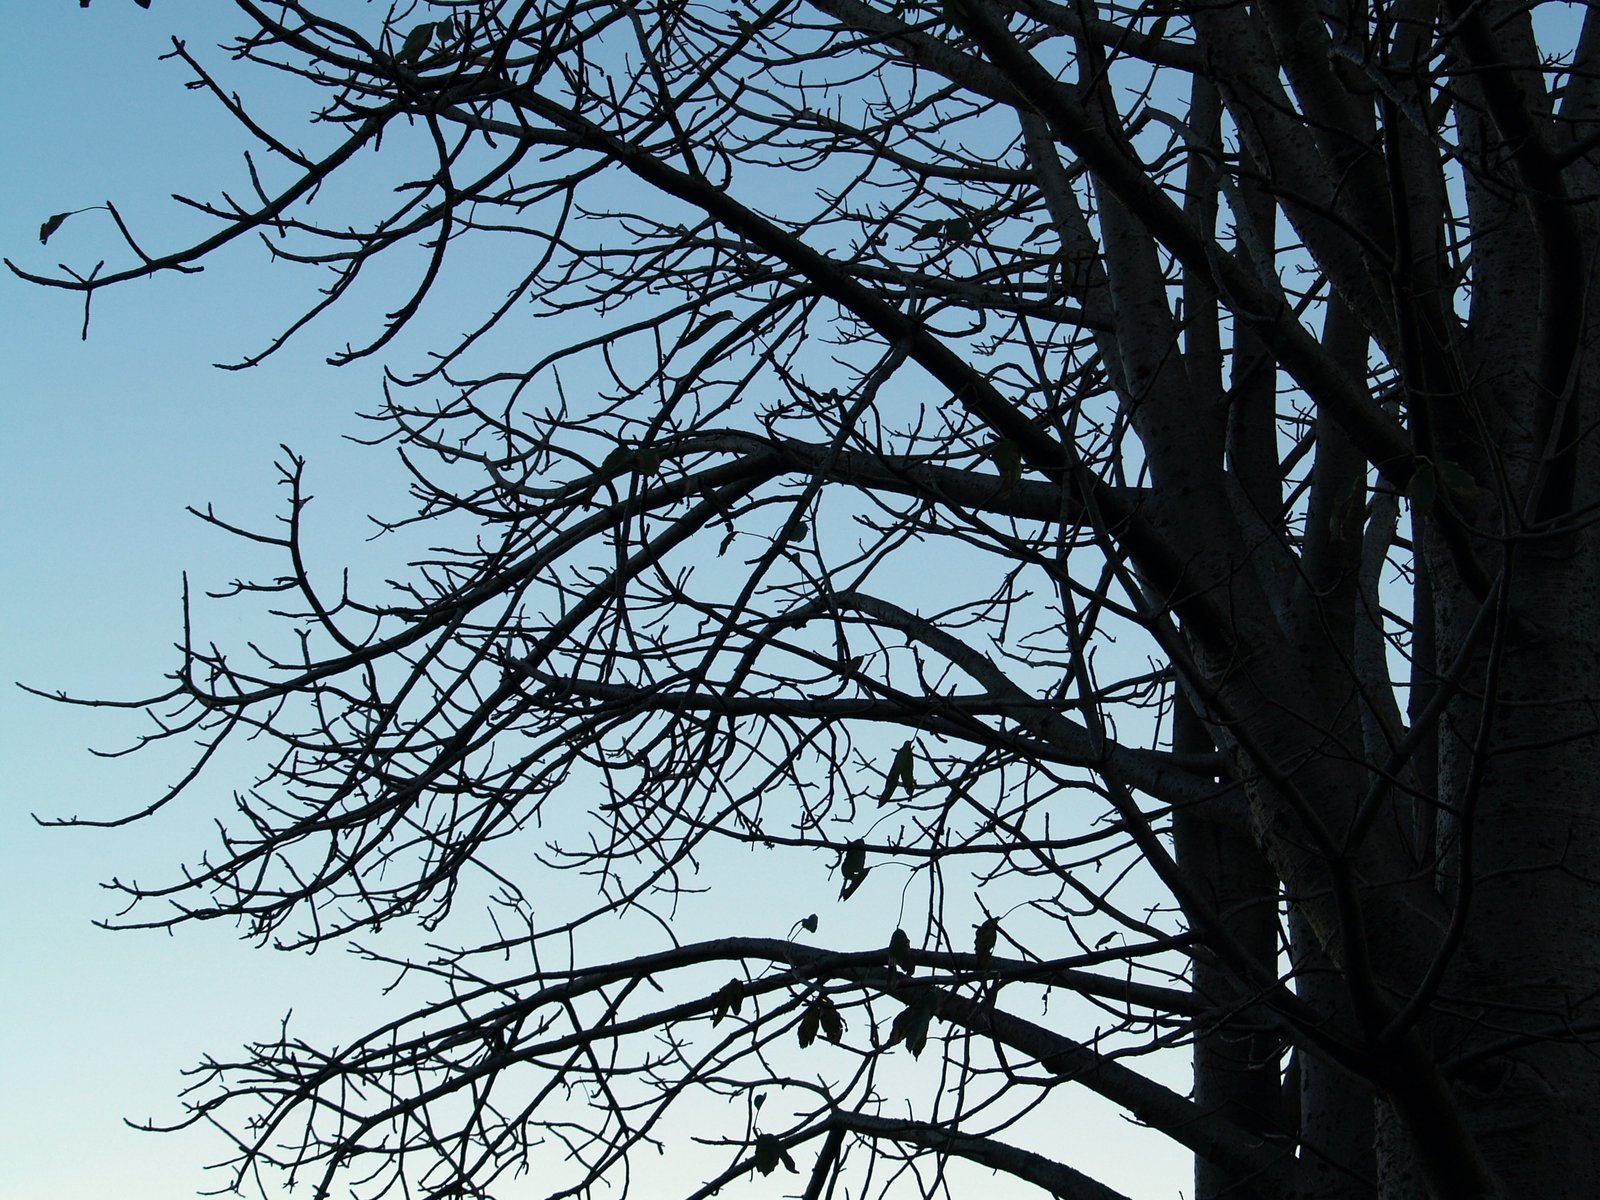 birds are perched on the nches of trees